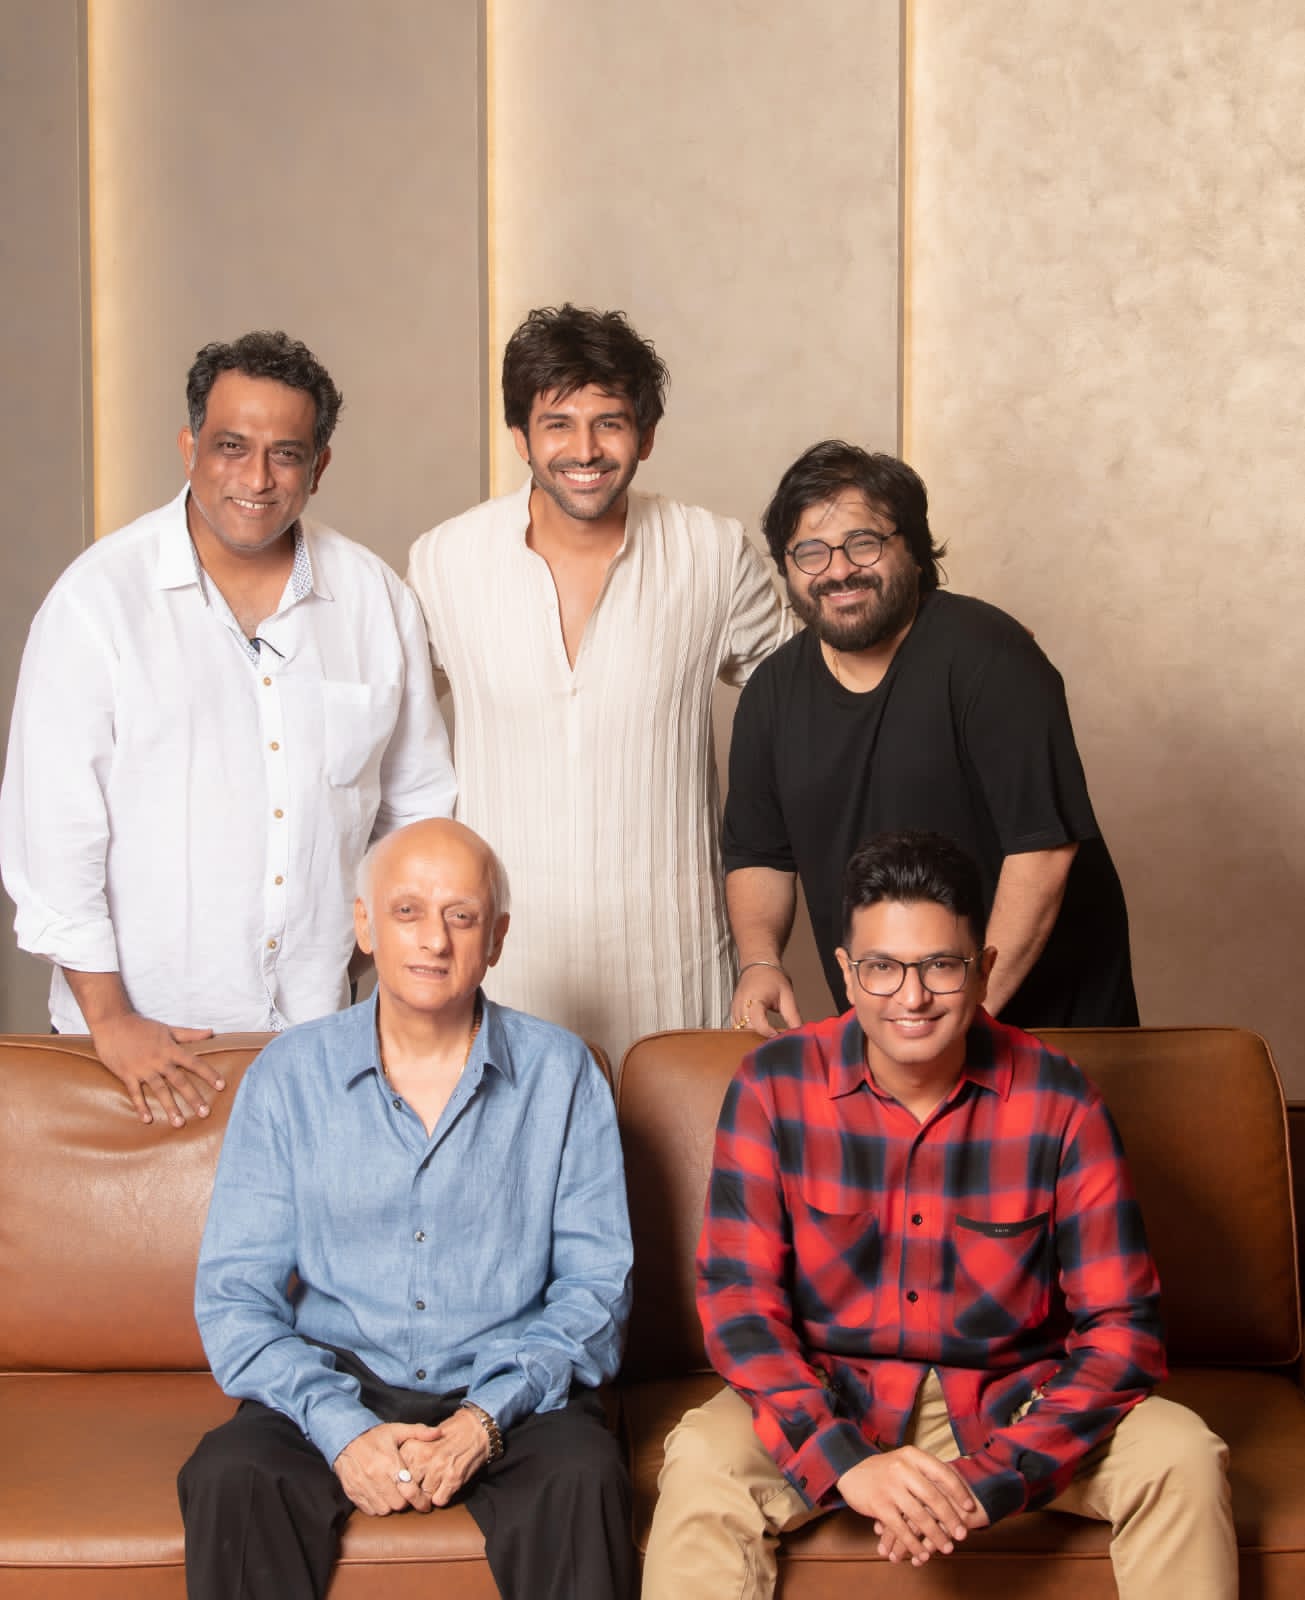 Kartik Aaryan to star in Mukesh Bhatt and Bhushan Kumar’s “Aashiqui 3”, the Musical franchise started by Shri Gulshan Kumar will be directed by Anurag Basu, with music by Pritam